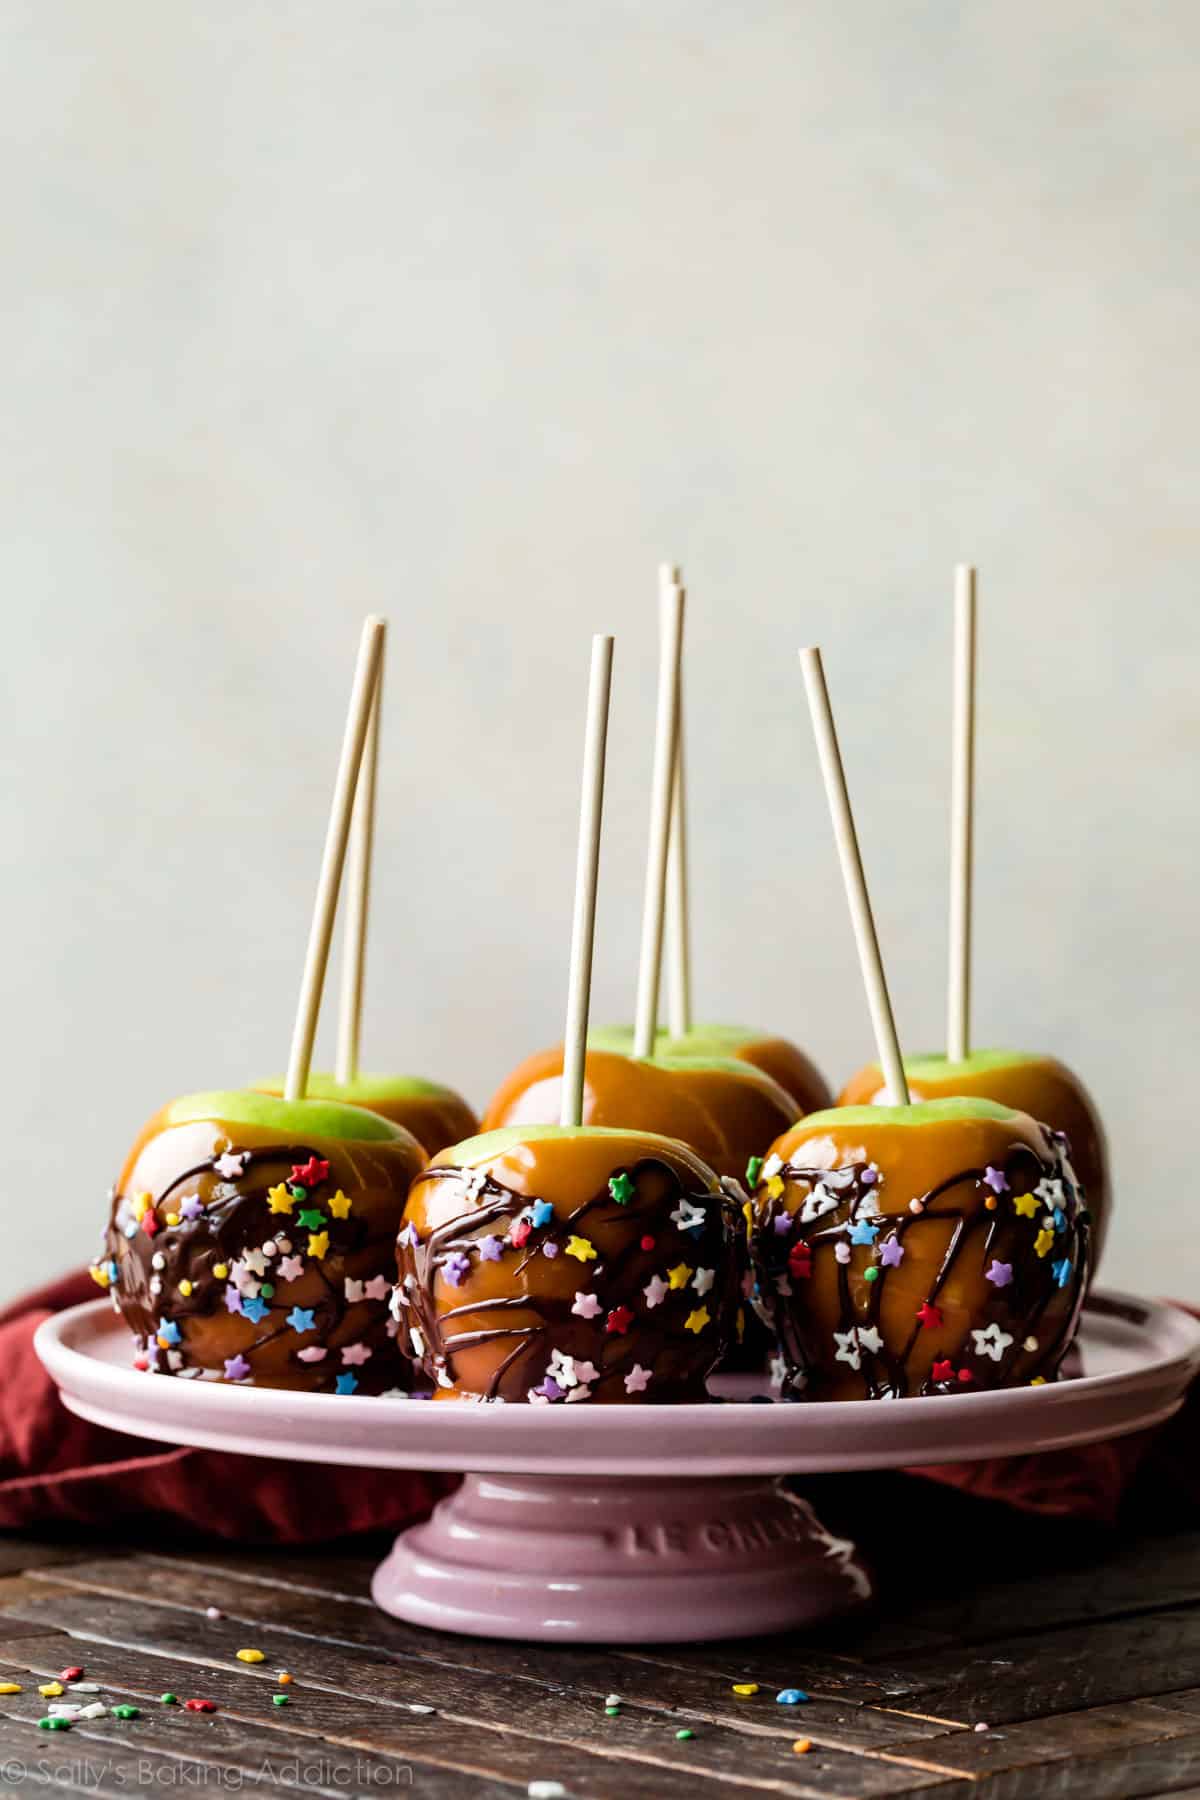 caramel apples with sprinkles and chocolate drizzle on pink cake stand